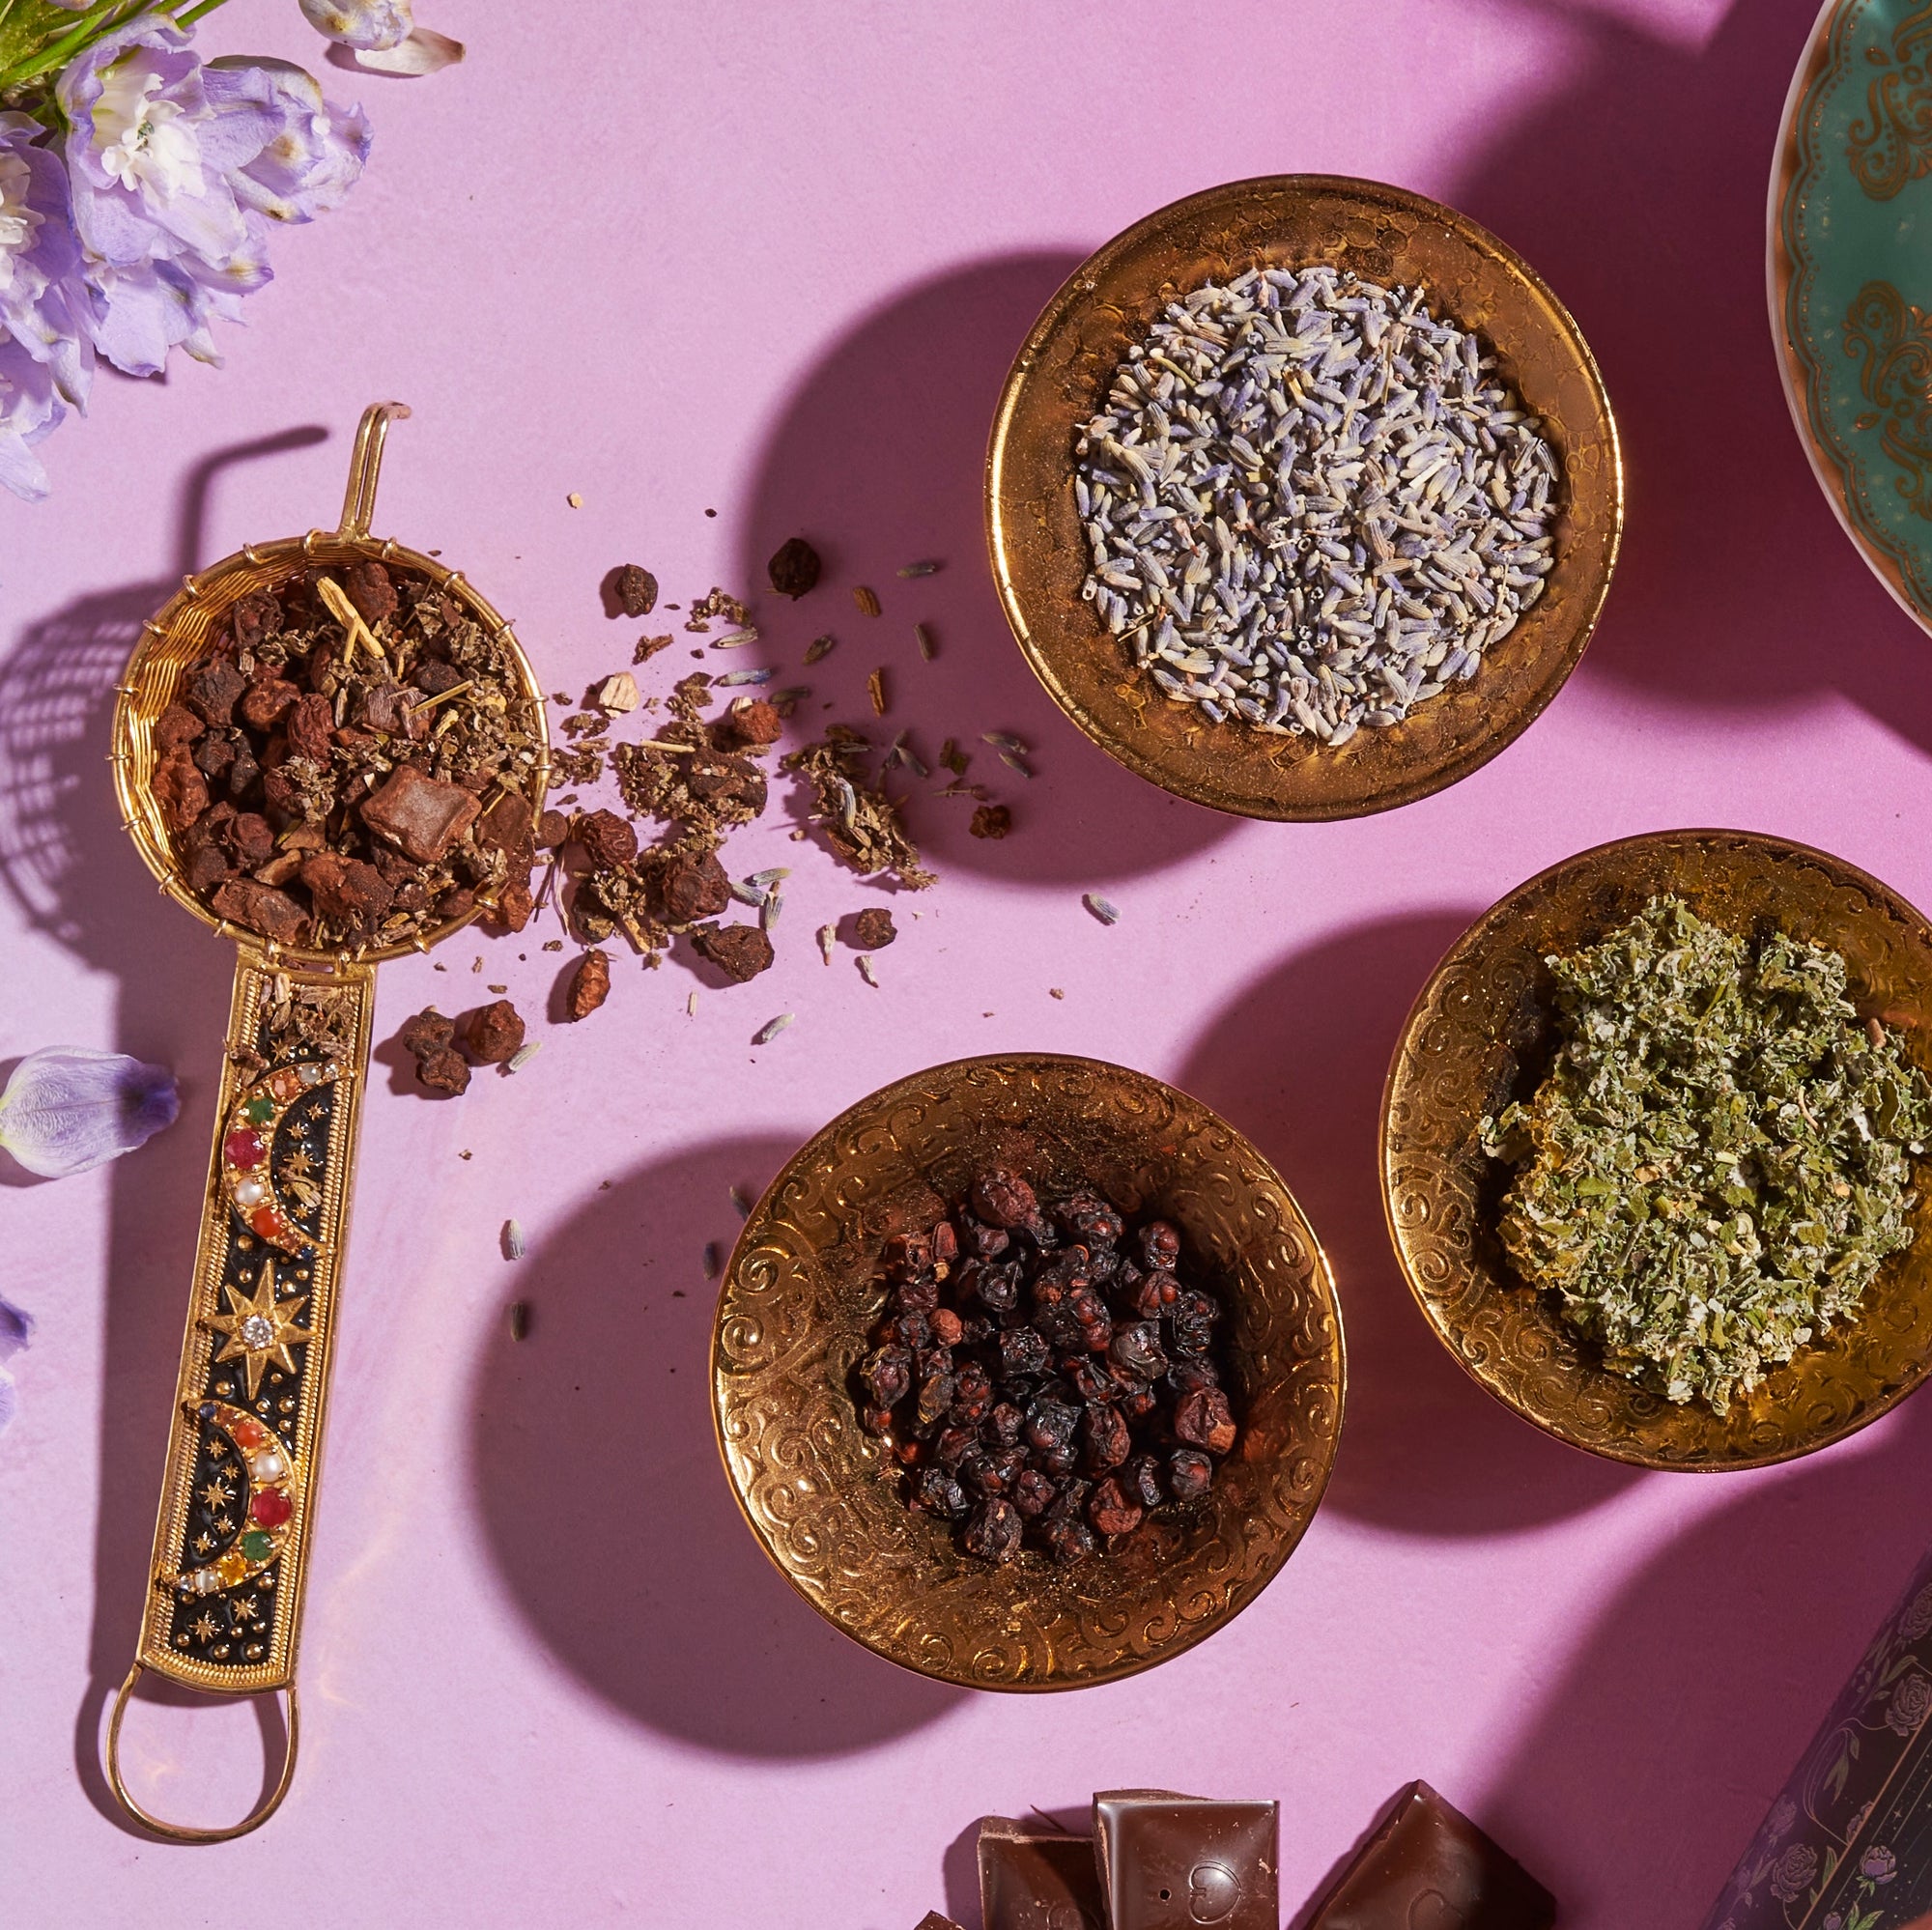 An overhead view of four ornate brass bowls on a pink surface. Each bowl contains different organic herbs and spices. The bowls are arranged neatly, casting shadows around them. Vibrant flowers and chocolate pieces surround the bowls, adding colorful touches reminiscent of a Magic Hour&#39;s The Empress: Lavender Currant Shatavari Cocoa Tea of Nurturing Creativity setup.